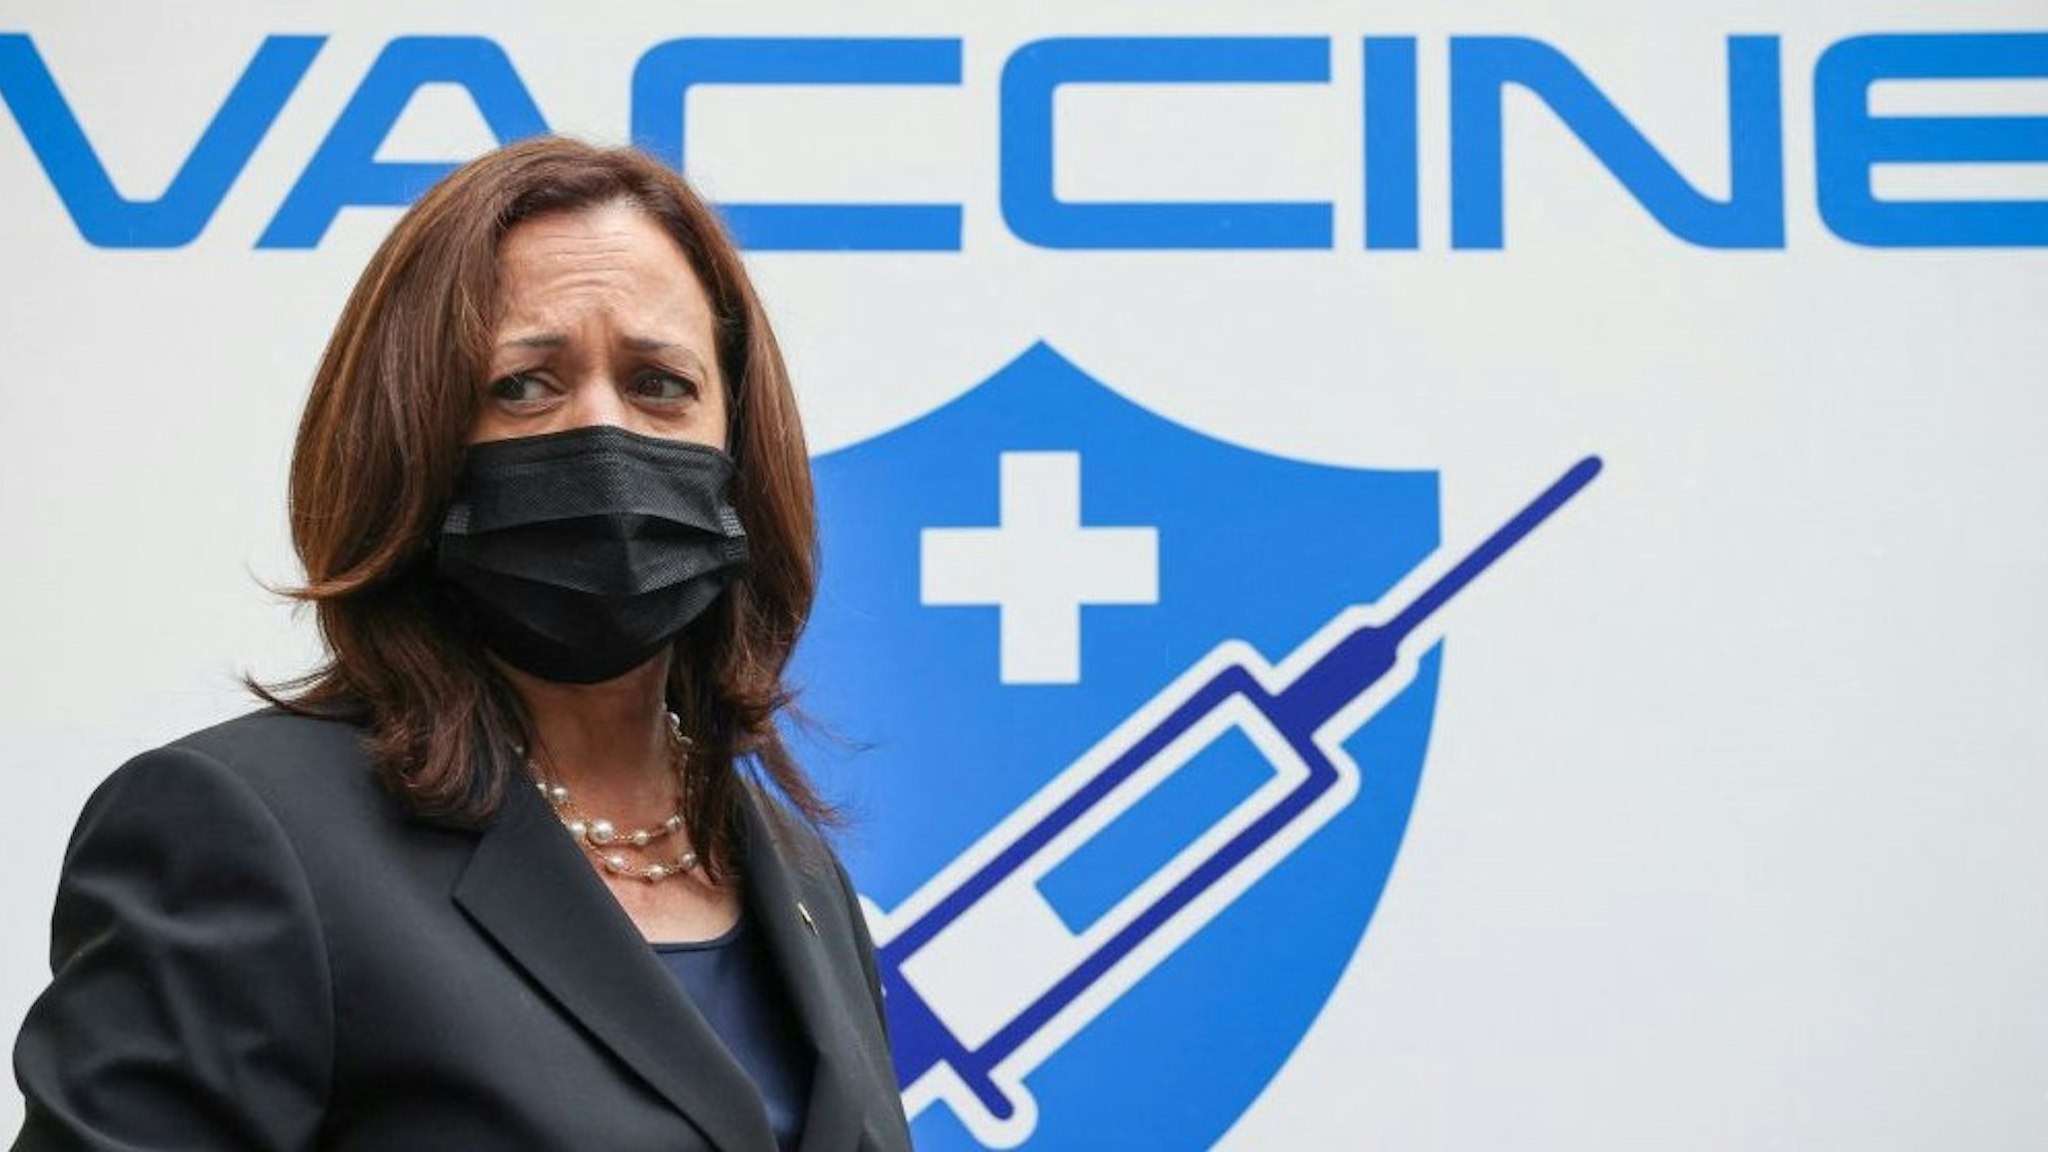 US Vice President Kamala Harris visits the National Institute of Hygiene and Epidemiology (NIHE) where 270,000 doses of Pfizer vaccine arrived earlier in the morning, in Hanoi, Vietnam, August 26, 2021. (Photo by EVELYN HOCKSTEIN / POOL / AFP) (Photo by E